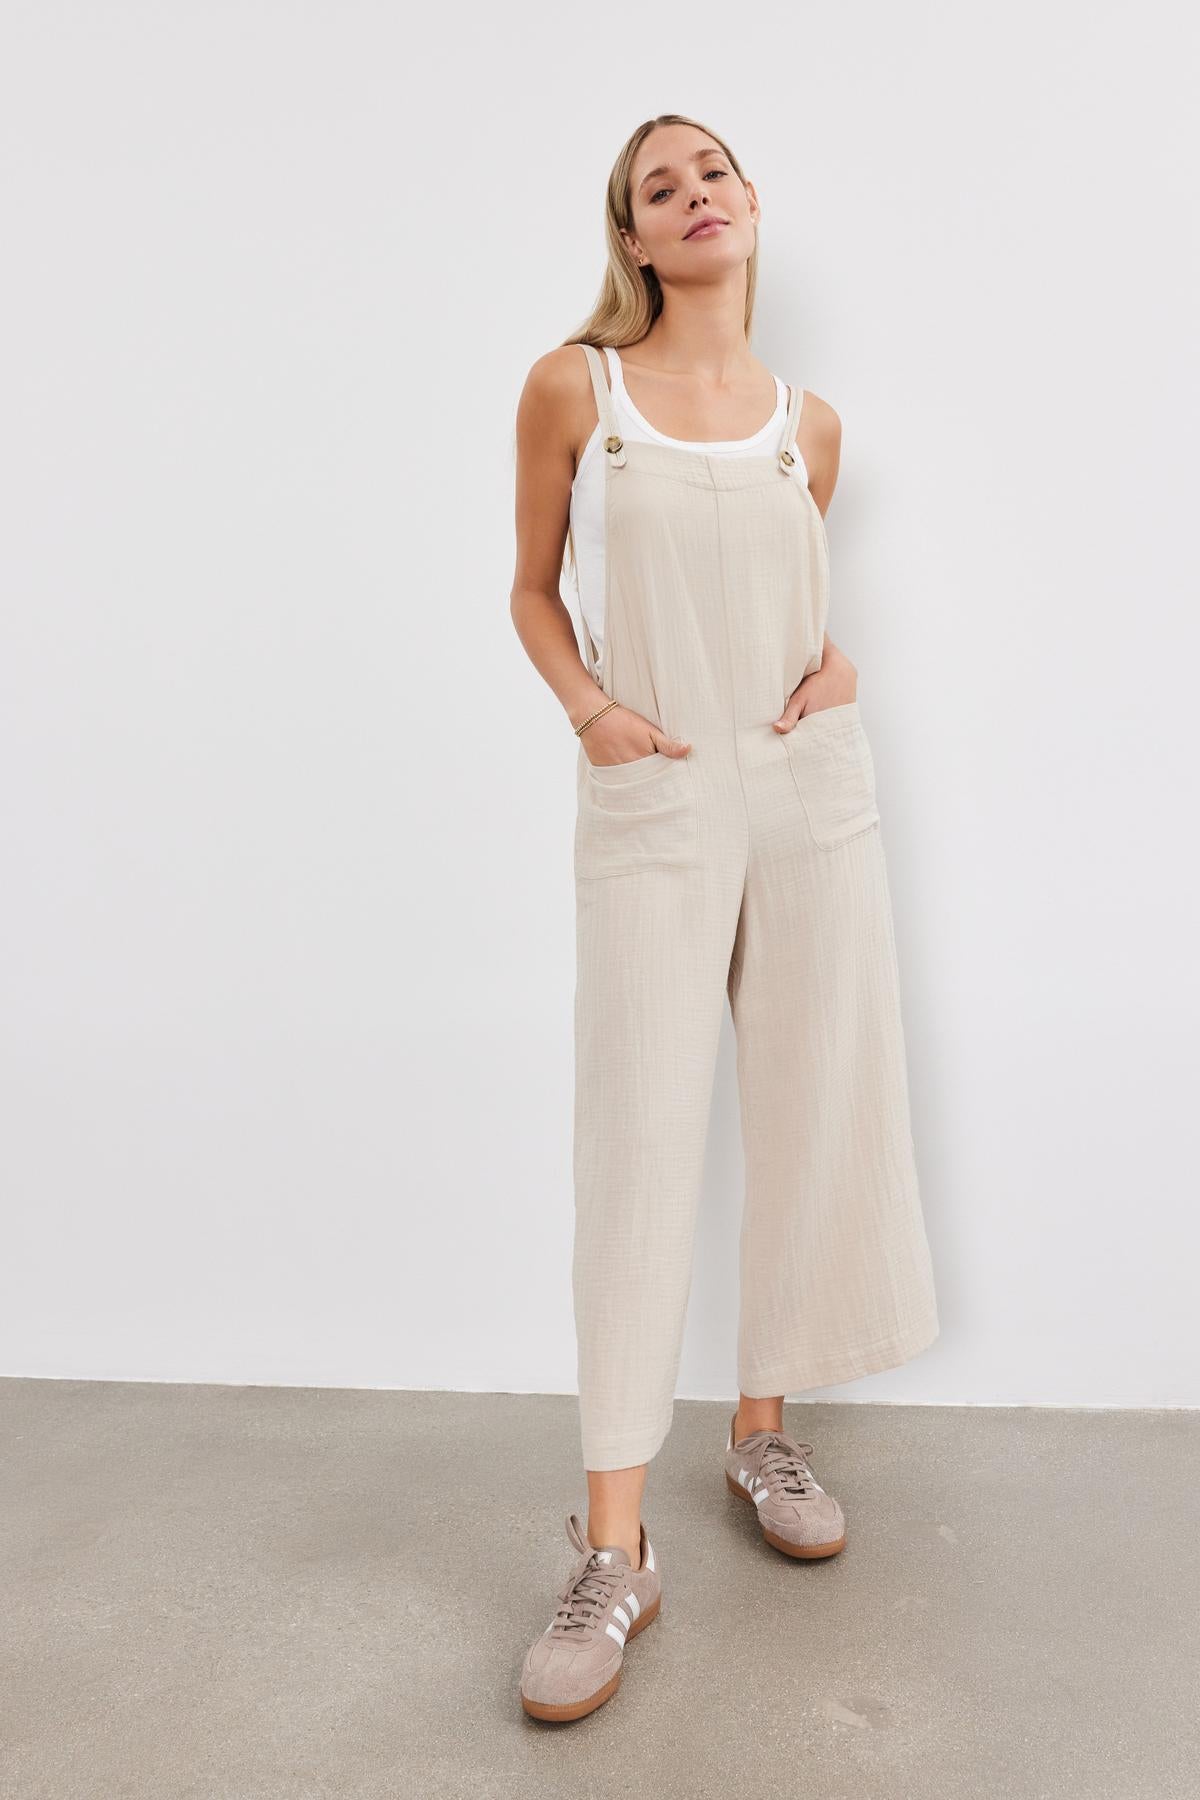   A young woman stands confidently, wearing a Velvet by Graham & Spencer EVERLEE COTTON GAUZE JUMPSUIT with sneakers, against a plain white backdrop. 